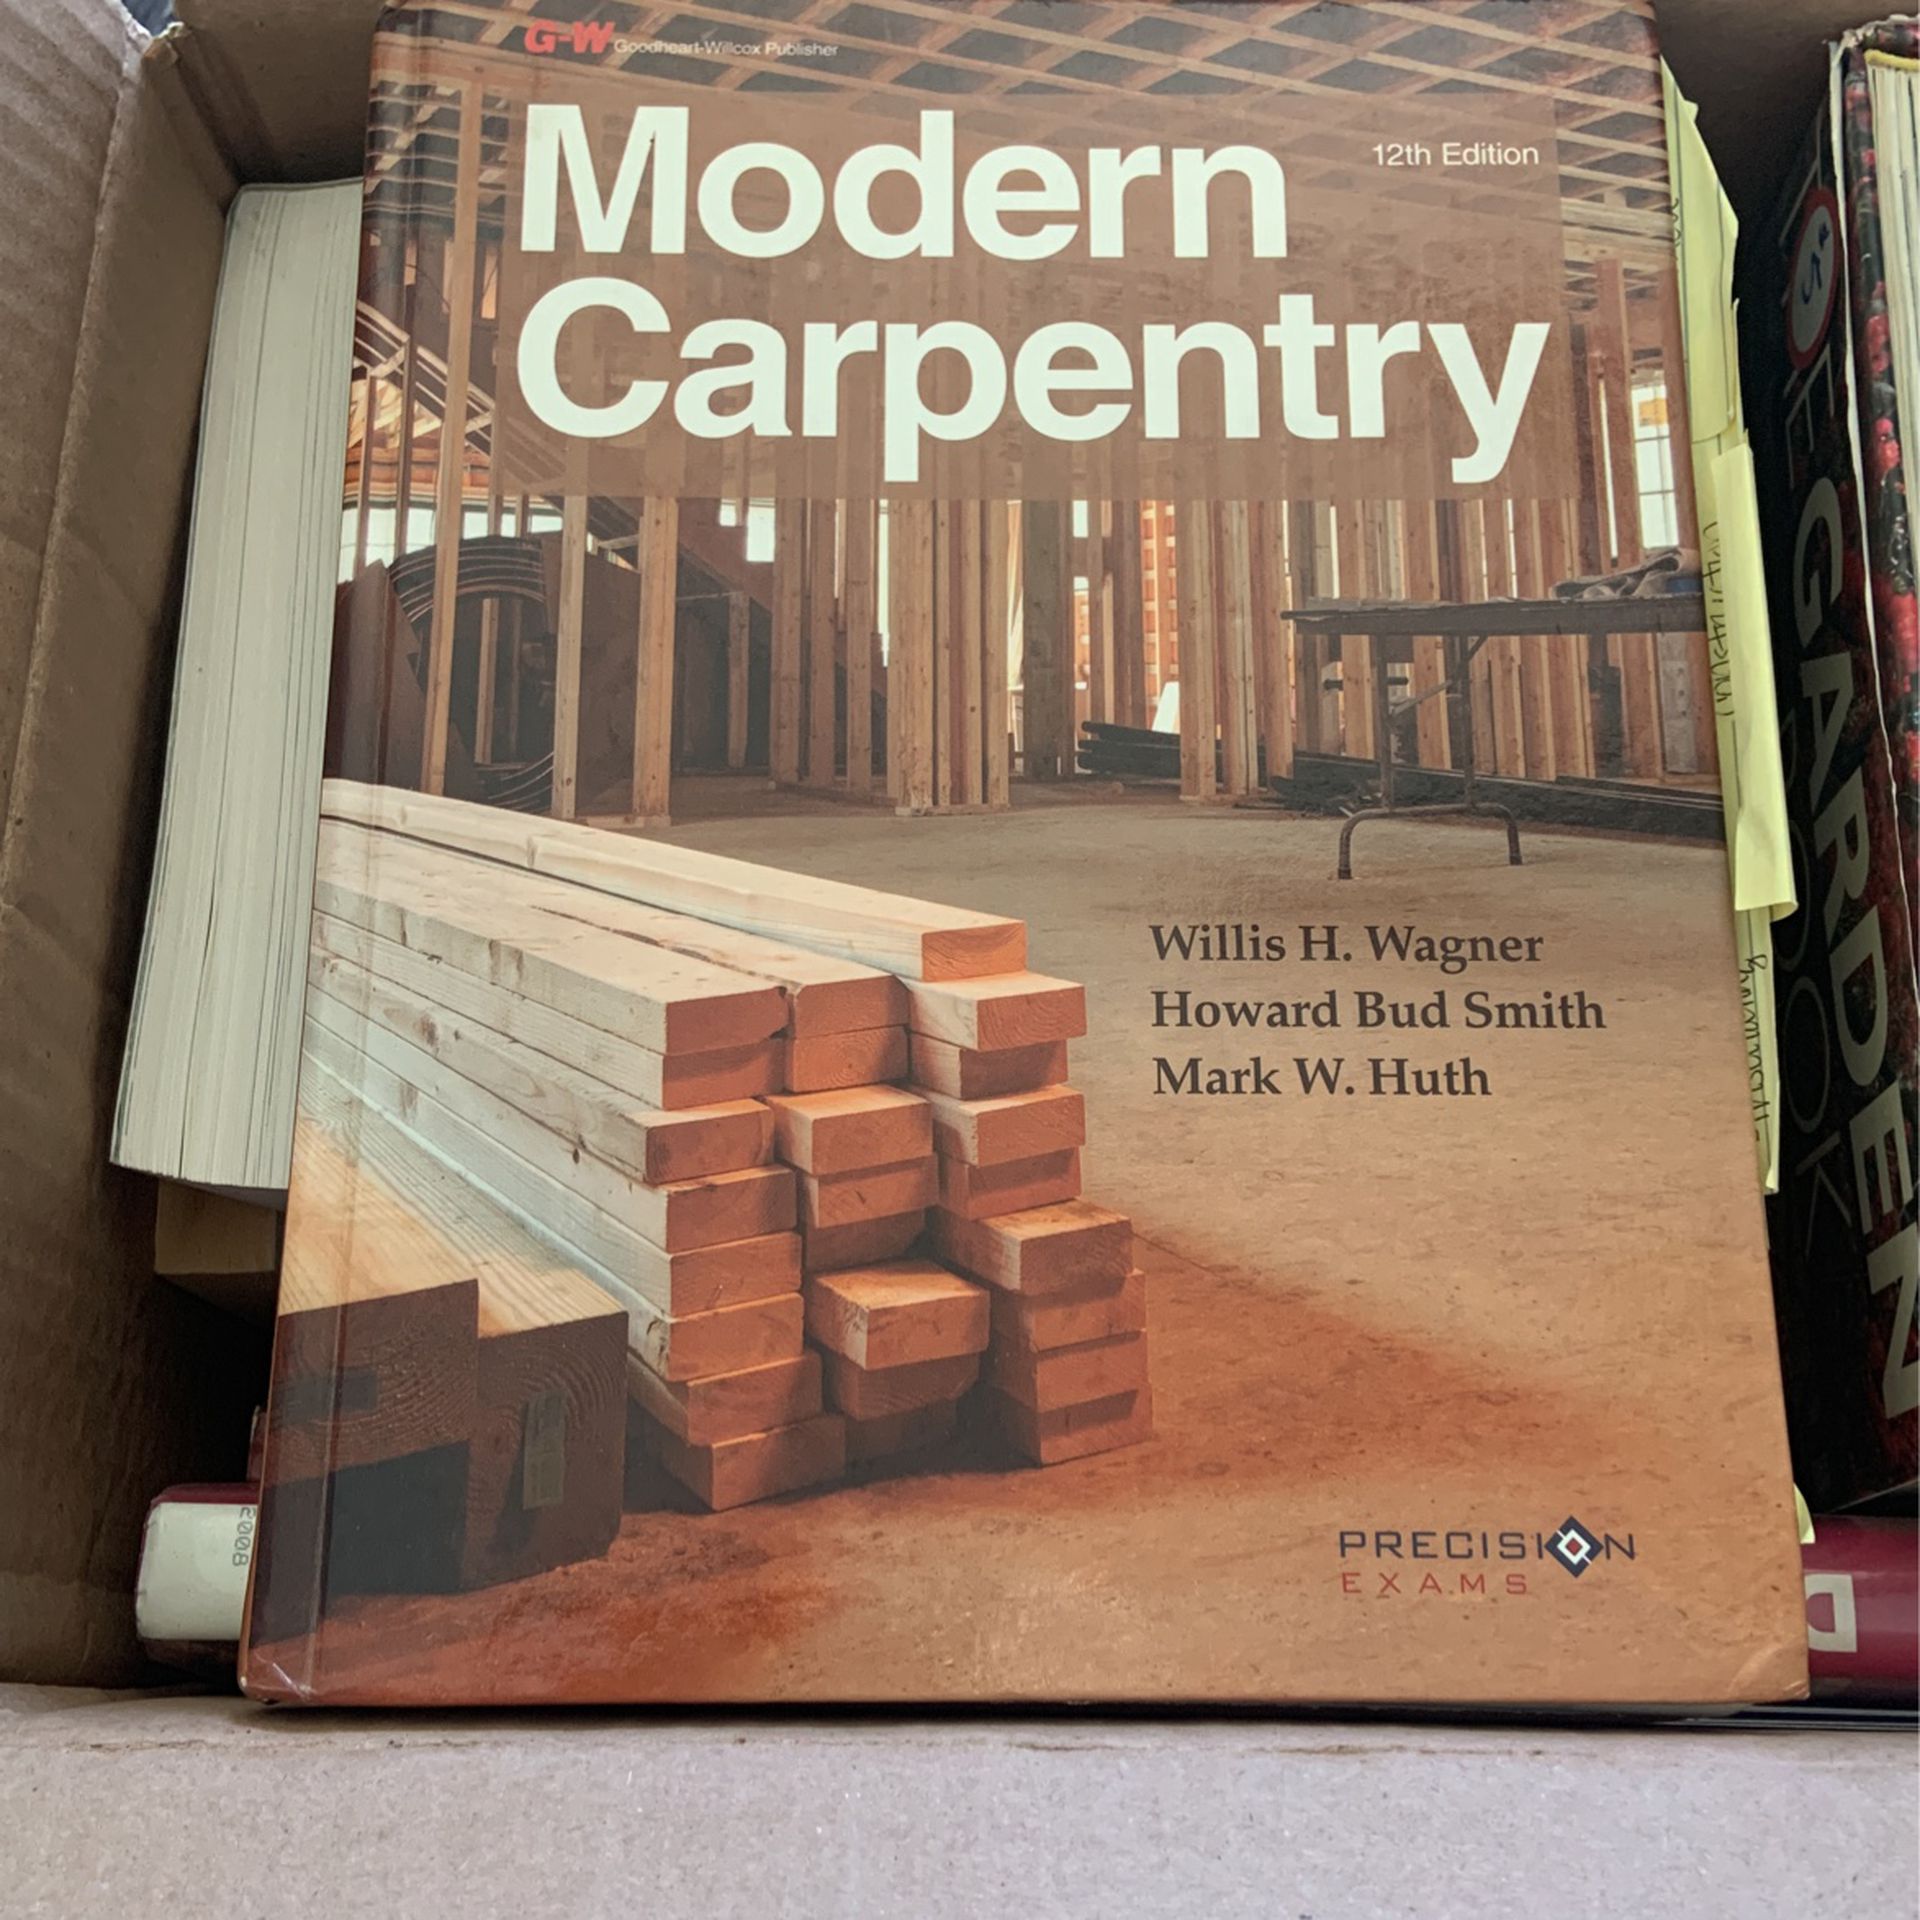 Modern Carpentry, Willis H. Wagner 12th Edition